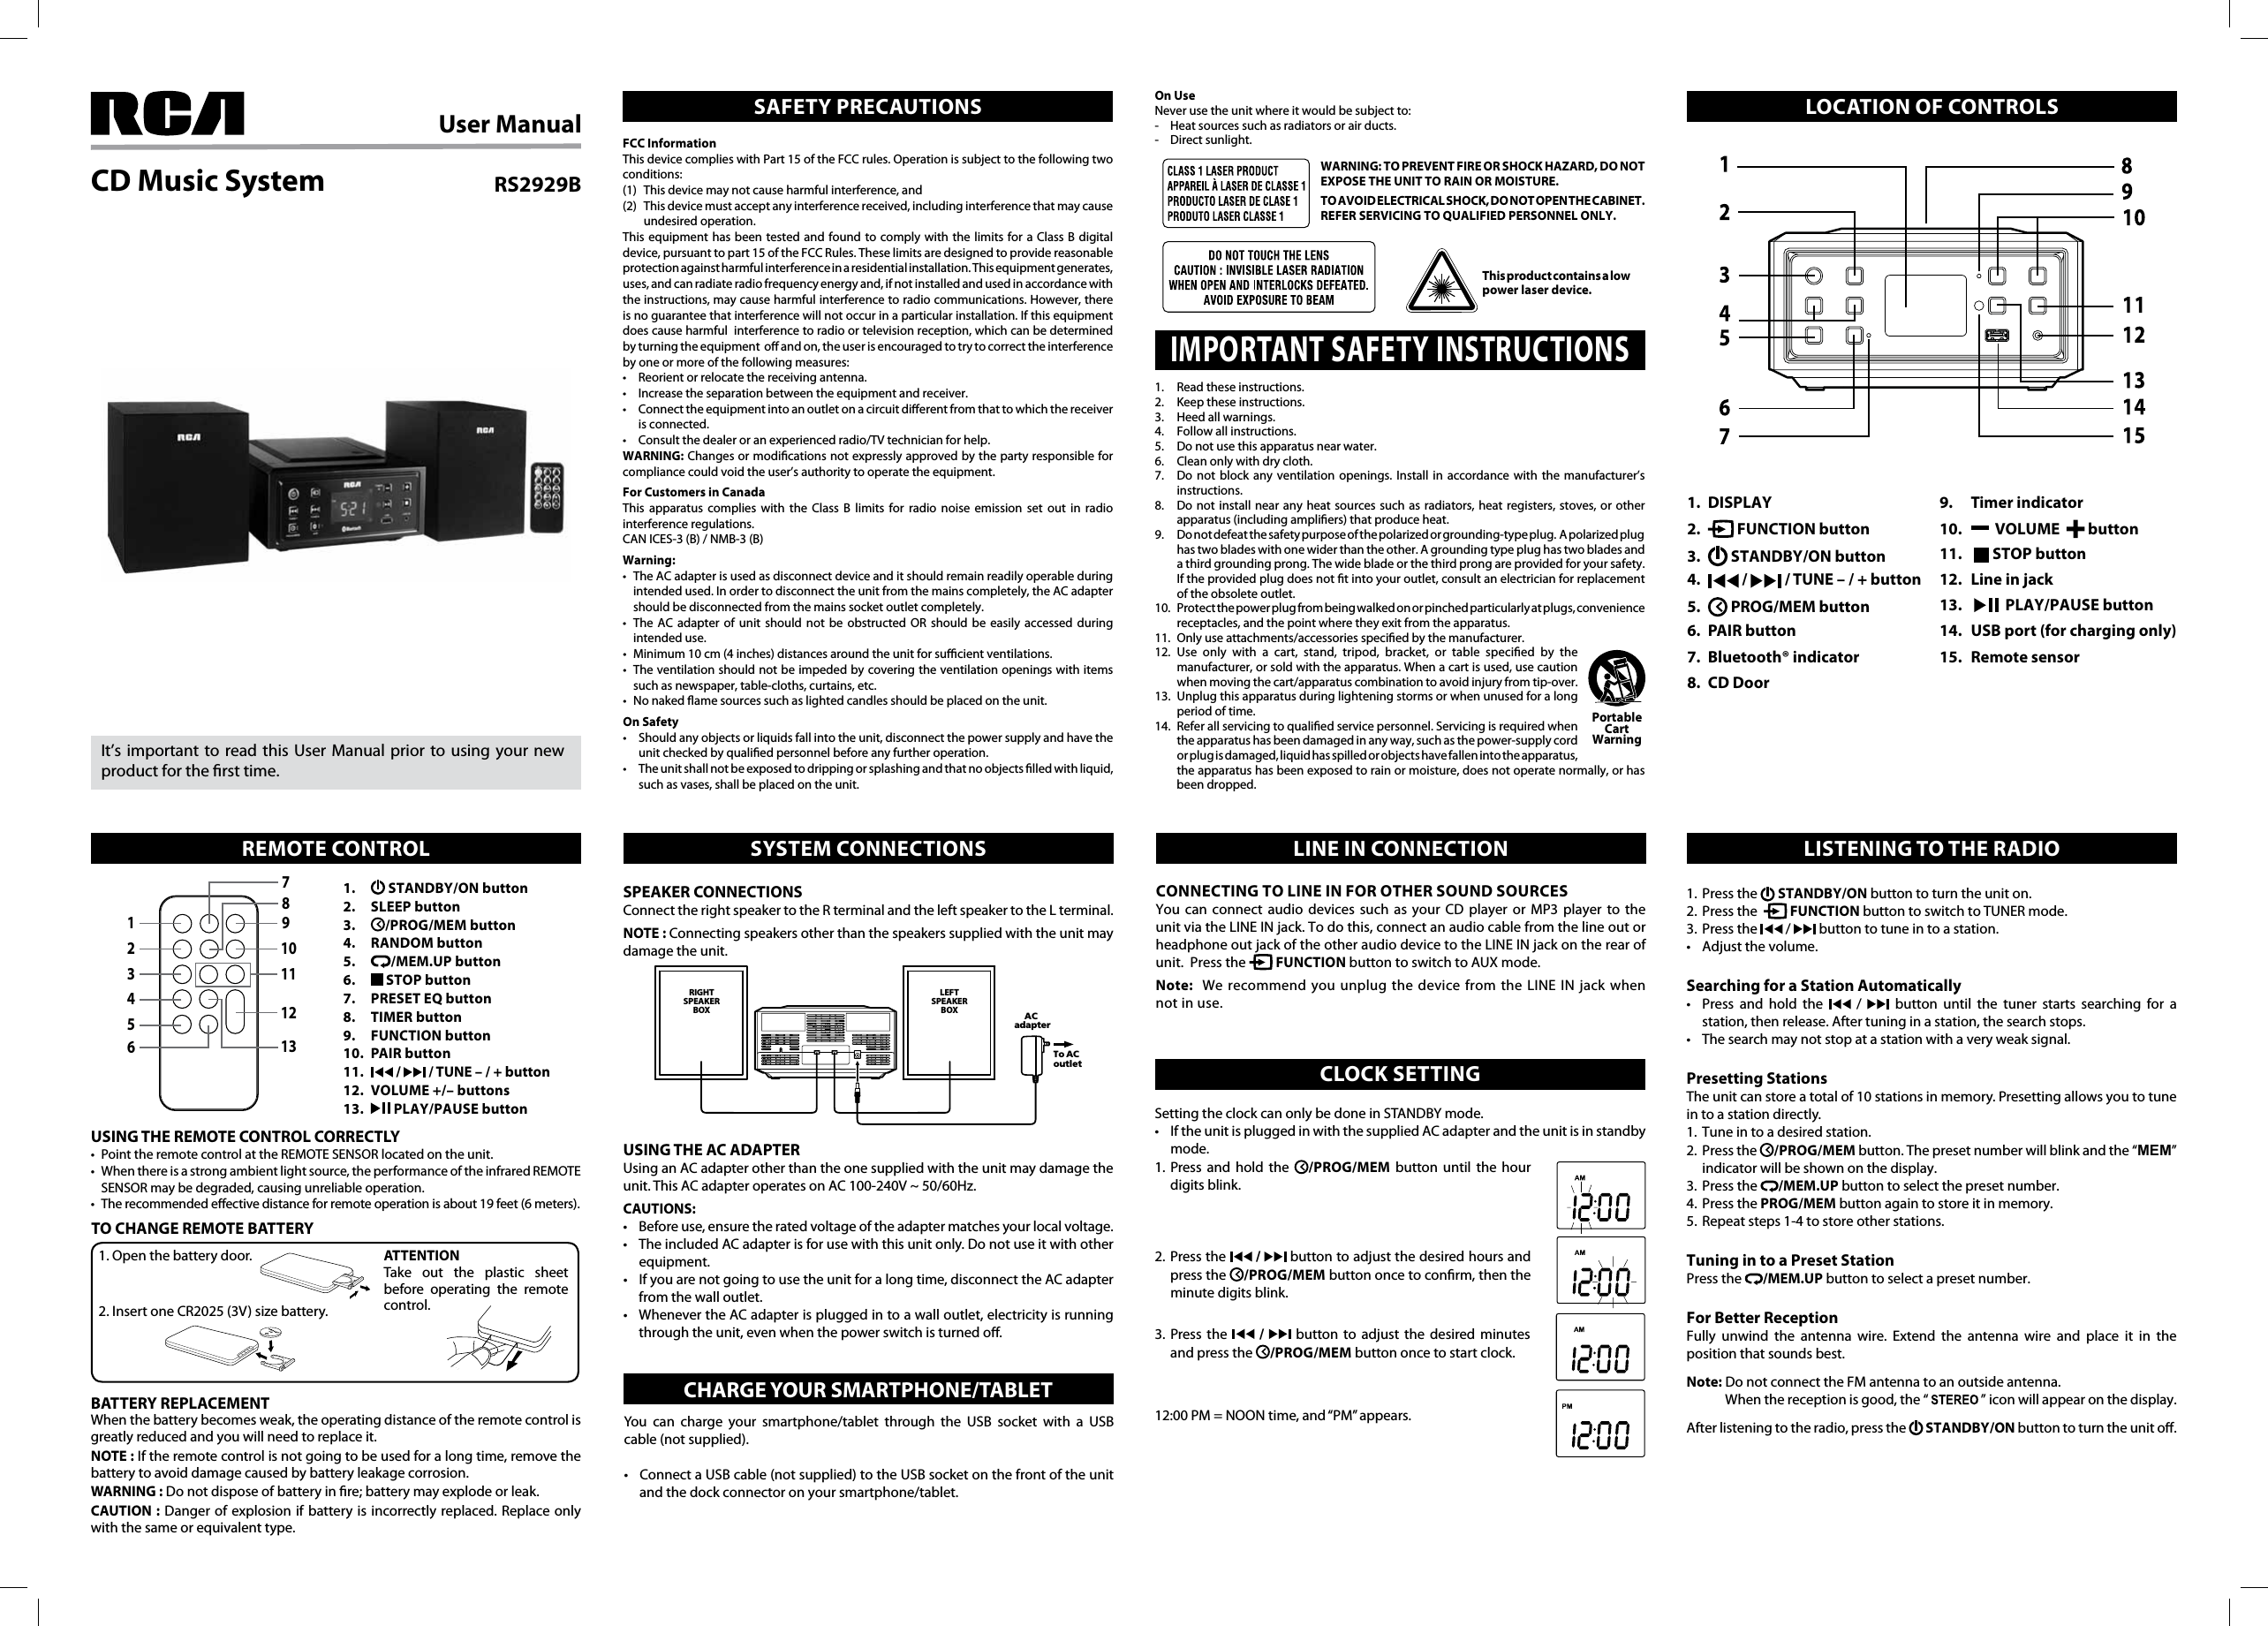 User ManualRS2929BCD Music SystemIt’s important to read this User Manual prior to using your new product for the rst time.FCC InformationThis device complies with Part 15 of the FCC rules. Operation is subject to the following two conditions:(1)  This device may not cause harmful interference, and (2)  This device must accept any interference received, including interference that may cause undesired operation.This equipment has been tested and found to comply with the limits for a Class B digital device, pursuant to part 15 of the FCC Rules. These limits are designed to provide reasonable protection against harmful interference in a residential installation. This equipment generates, uses, and can radiate radio frequency energy and, if not installed and used in accordance with the instructions, may cause harmful interference to radio communications. However, there is no guarantee that interference will not occur in a particular installation. If this equipment does cause harmful  interference to radio or television reception, which can be determined by turning the equipment  o and on, the user is encouraged to try to correct the interference by one or more of the following measures:• Reorientorrelocatethereceivingantenna.• Increasetheseparationbetweentheequipmentandreceiver.• Connecttheequipmentintoanoutletonacircuitdierentfromthattowhichthereceiveris connected.• Consultthedealeroranexperiencedradio/TVtechnicianforhelp.WARNING:Changesormodicationsnotexpresslyapprovedbythepartyresponsibleforcompliance could void the user’s authority to operate the equipment. For Customers in CanadaThis apparatus complies with the Class B limits for radio noise emission set out in radio interference regulations.CANICES-3(B)/NMB-3(B)Warning: • TheACadapterisusedasdisconnectdeviceanditshouldremainreadilyoperableduringintended used. In order to disconnect the unit from the mains completely, the AC adapter should be disconnected from the mains socket outlet completely.• The AC adapter of unit should not be obstructed OR should be easily accessed duringintended use.• Minimum10cm(4inches)distancesaroundtheunitforsucientventilations.• Theventilationshouldnotbeimpededbycoveringtheventilationopeningswithitemssuch as newspaper, table-cloths, curtains, etc.• Nonakedamesourcessuchaslightedcandlesshouldbeplacedontheunit.On Safety• Shouldanyobjectsorliquidsfallintotheunit,disconnectthepowersupplyandhavetheunit checked by qualied personnel before any further operation.• Theunitshallnotbeexposedtodrippingorsplashingandthatnoobjectslledwithliquid,such as vases, shall be placed on the unit.SAFETY PRECAUTIONS LOCATION OF CONTROLSREMOTE CONTROL SYSTEM CONNECTIONS LINE IN CONNECTIONCHARGE YOUR SMARTPHONE/TABLETCLOCK SETTING1.  Read these instructions.2.  Keep these instructions.3.  Heed all warnings.4. Followallinstructions.5.  Do not use this apparatus near water.6.  Clean only with dry cloth.7.  Do not block any ventilation openings. Install in accordance with the manufacturer’s instructions.8.  Do not install near any heat sources such as radiators, heat registers, stoves, or other apparatus (including ampliers) that produce heat.9.  Do not defeat the safety purpose of the polarized or grounding-type plug.  A polarized plug has two blades with one wider than the other. A grounding type plug has two blades and a third grounding prong. The wide blade or the third prong are provided for your safety. If the provided plug does not t into your outlet, consult an electrician for replacement of the obsolete outlet.10. Protectthepowerplugfrombeingwalkedonorpinchedparticularlyatplugs,conveniencereceptacles,andthepointwheretheyexitfromtheapparatus.11. Onlyuseattachments/accessoriesspeciedbythemanufacturer.12. Use only with a cart, stand, tripod, bracket, or table specied by the manufacturer, or sold with the apparatus. When a cart is used, use caution whenmovingthecart/apparatuscombinationtoavoidinjuryfromtip-over.13.  Unplug this apparatus during lightening storms or when unused for a long period of time.14. Referallservicingtoqualiedservicepersonnel.Servicingisrequiredwhenthe apparatus has been damaged in any way, such as the power-supply cord or plug is damaged, liquid has spilled or objects have fallen into the apparatus, theapparatushasbeenexposedtorainormoisture,doesnotoperatenormally,orhasbeen dropped.IMPORTANT SAFETY INSTRUCTIONSPortable Cart WarningWARNING: TO PREVENT FIRE OR SHOCK HAZARD, DO NOT EXPOSE THE UNIT TO RAIN OR MOISTURE.TO AVOID ELECTRICAL SHOCK, DO NOT OPEN THE CABINET.REFER SERVICING TO QUALIFIED PERSONNEL ONLY.This product contains a low power laser device.1.  DISPLAY2.   FUNCTION button 3.   STANDBY/ON button4.   /   / TUNE – / + button5.   PROG/MEM button6.  PAIR button7.  Bluetooth® indicator8.  CD Door9.    Timer indicator10.     VOLUME    button11.    STOP button12.  Line in jack13.     PLAY/PAUSE button14.  USB port (for charging only)15.  Remote sensor1.    STANDBY/ON button2.   SLEEP button3.   /PROG/MEM button4.   RANDOM button5.   /MEM.UP button6.   STOP button7.  PRESET EQ button8.  TIMER button9.  FUNCTION button10.  PAIR button11.   /   / TUNE – / + button12.  VOLUME +/– buttons 13.   PLAY/PAUSE buttonUSING THE REMOTE CONTROL CORRECTLY• PointtheremotecontrolattheREMOTESENSORlocatedontheunit.• Whenthereisastrongambientlightsource,theperformanceoftheinfraredREMOTESENSOR may be degraded, causing unreliable operation.•Therecommendedeectivedistanceforremoteoperationisabout19feet(6meters).TO CHANGE REMOTE BATTERY1. Open the battery door.789101112131234562.InsertoneCR2025(3V)sizebattery.ATTENTIONTake out the plastic sheet before operating the remote control.BATTERY REPLACEMENTWhen the battery becomes weak, the operating distance of the remote control is greatly reduced and you will need to replace it.NOTE : If the remote control is not going to be used for a long time, remove the battery to avoid damage caused by battery leakage corrosion.WARNING :Donotdisposeofbatteryinre;batterymayexplodeorleak.CAUTION :Dangerofexplosionif battery is incorrectlyreplaced.Replaceonlywith the same or equivalent type.SPEAKER CONNECTIONSConnect the right speaker to the R terminal and the left speaker to the L terminal.NOTE : Connecting speakers other than the speakers supplied with the unit may damage the unit.Setting the clock can only be done in STANDBY mode.• IftheunitispluggedinwiththesuppliedACadapterandtheunitisinstandbymode.1. Press and hold the  /PROG/MEM button until the hour digits blink.2.  Press  the   /   button to adjust the desired hours and press the  /PROG/MEM button once to conrm, then the minute digits blink.3.  Press  the   /   button to adjust the desired minutes and press the  /PROG/MEM button once to start clock.12:00PM=NOONtime,and“PM”appears.USING THE AC ADAPTERUsing an AC adapter other than the one supplied with the unit may damage the unit.ThisACadapteroperatesonAC100-240V~50/60Hz.CAUTIONS:• Beforeuse,ensuretheratedvoltageoftheadaptermatchesyourlocalvoltage.• TheincludedACadapterisforusewiththisunitonly.Donotuseitwithotherequipment.• Ifyouarenotgoingtousetheunitforalongtime,disconnecttheACadapterfrom the wall outlet.• WhenevertheACadapterispluggedintoawalloutlet,electricityisrunningthrough the unit, even when the power switch is turned o.On UseNever use the unit where it would be subject to:-  Heat sources such as radiators or air ducts.-  Direct sunlight.LISTENING TO THE RADIO1.  Press the   STANDBY/ON button to turn the unit on.2.  Press the    FUNCTION button to switch to TUNER mode.3.  Press the  /  button to tune in to a station.• Adjustthevolume.Searching for a Station Automatically• Press and hold the  /  button until the tuner starts searching for a station, then release. After tuning in a station, the search stops.• Thesearchmaynotstopatastationwithaveryweaksignal.Presetting StationsTheunitcanstoreatotalof10stationsinmemory.Presettingallowsyoutotunein to a station directly.1.  Tune in to a desired station.2.  Press the  /PROG/MEMbutton.Thepresetnumberwillblinkandthe“MEM”indicator will be shown on the display.3.  Press the  /MEM.UP button to select the preset number.4. PressthePROG/MEM button again to store it in memory.5. Repeatsteps1-4tostoreotherstations.Tuning in to a Preset StationPress the  /MEM.UP button to select a preset number.For Better ReceptionFully unwind the antenna wire. Extend the antenna wire and place it in theposition that sounds best.Note: Do not connect the FM antenna to an outside antenna.   Whenthereceptionisgood,the“ ”iconwillappearonthedisplay.After listening to the radio, press the   STANDBY/ON button to turn the unit o.CONNECTING TO LINE IN FOR OTHER SOUND SOURCESYou can connect audio devices such as your CD player or MP3 player to the unit via the LINE IN jack. To do this, connect an audio cable from the line out or headphone out jack of the other audio device to the LINE IN jack on the rear of unit.  Press the   FUNCTION button to switch to AUX mode. Note:  We recommend you unplug the device from the LINE IN jack when not in use.You can charge your smartphone/tablet through the USB socket with a USBcable (not supplied).• ConnectaUSBcable(notsupplied)totheUSBsocketonthefrontoftheunitand the dock connector on your smartphone/tablet.RIGHTSPEAKERBOXLEFTSPEAKERBOX AC adapterTo AC outlet